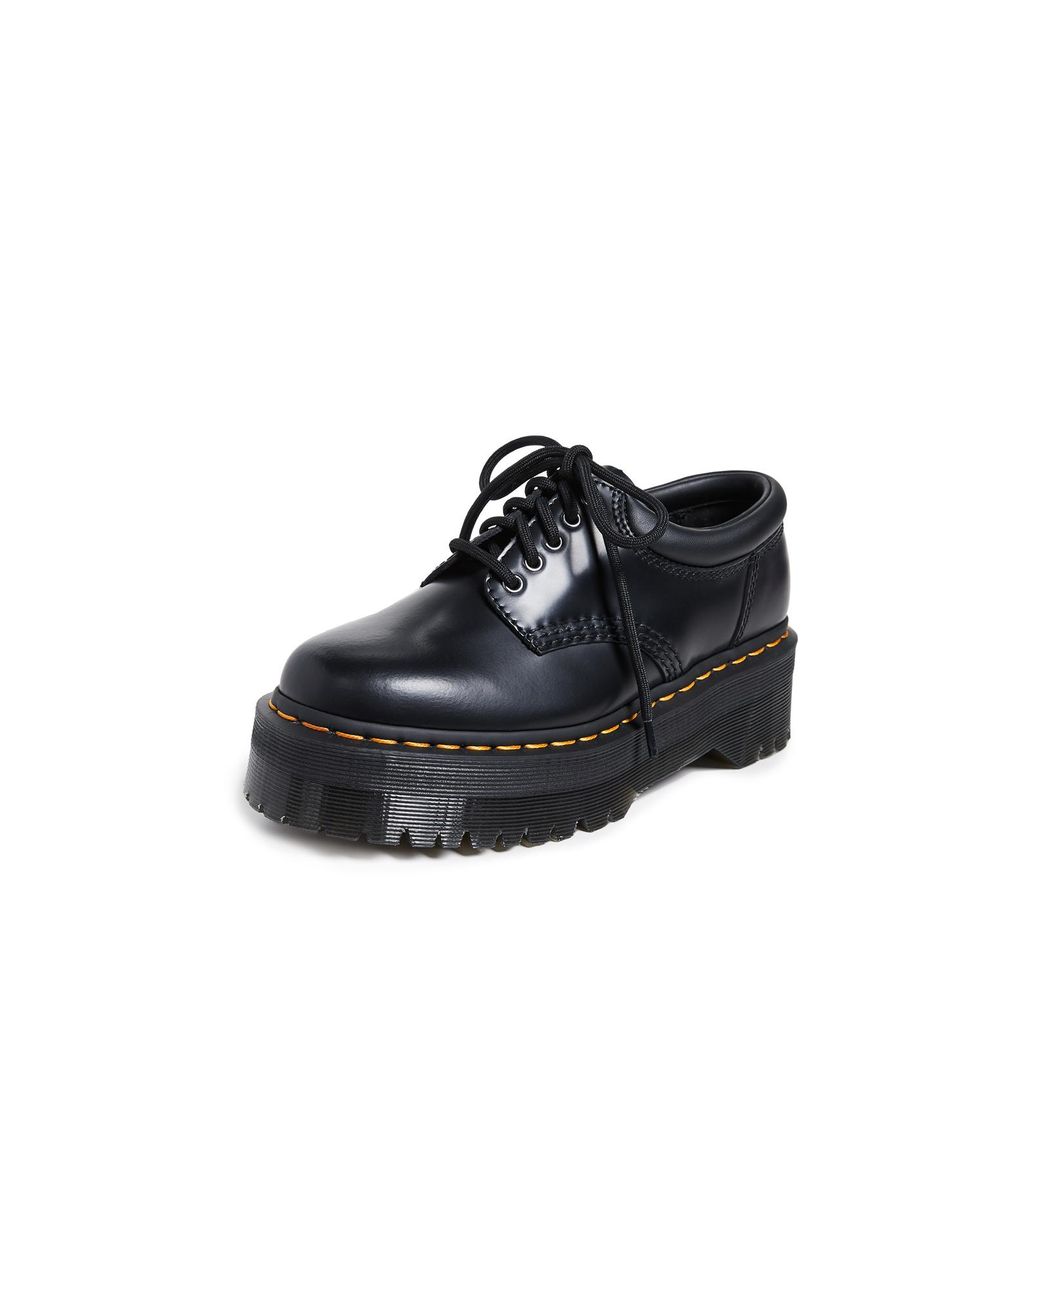 Dr. Martens Leather 8053 Quad 5 Tie Shoes in Black | Lyst Canada